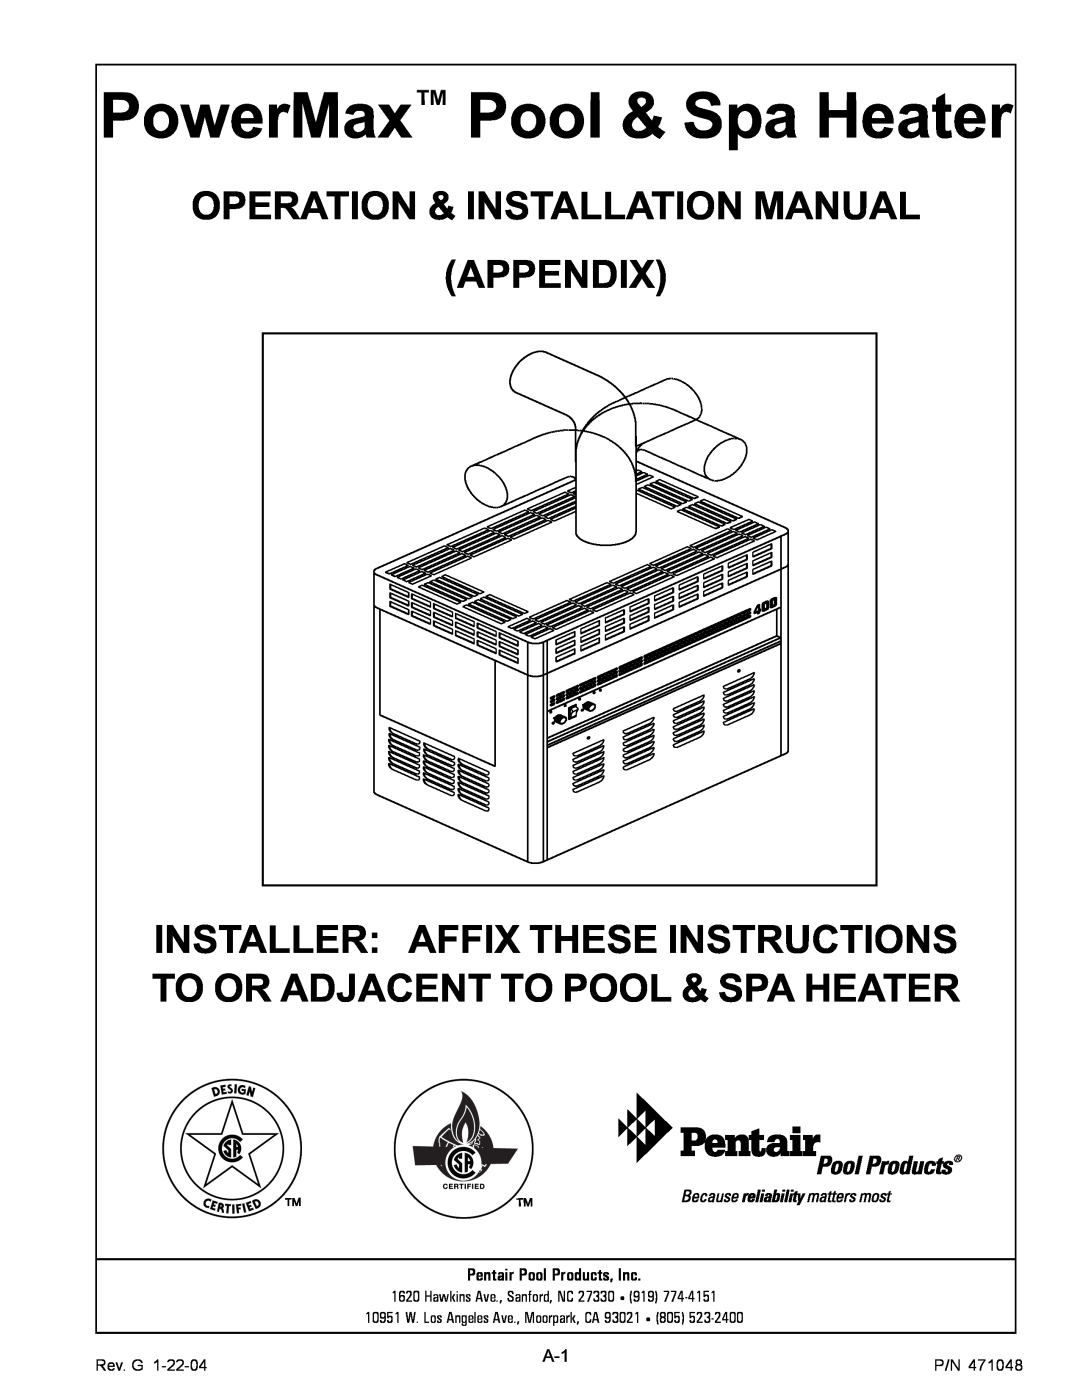 Pentair 100 PowerMax Pool & Spa Heater, Operation & Installation Manual, Appendix, Installer Affix These Instructions 